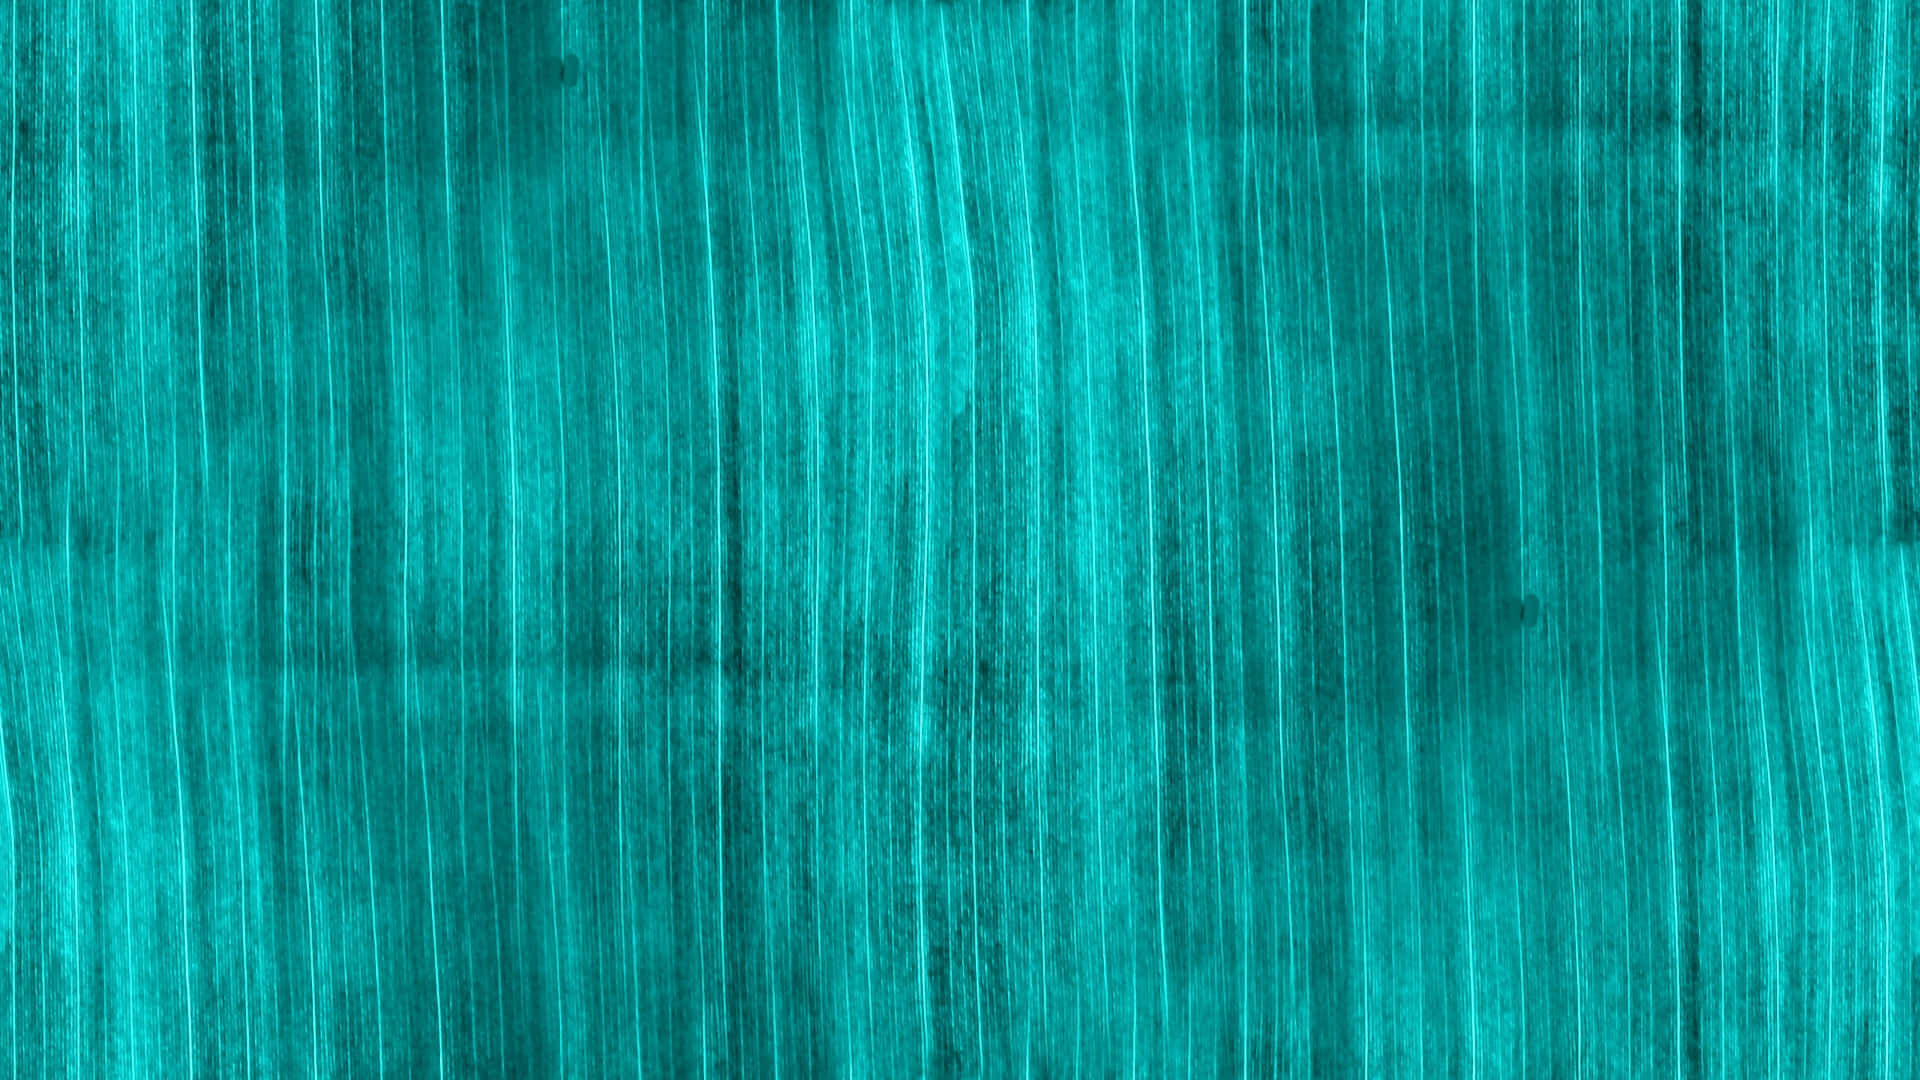 Relax and Enjoy the Vibrancy of Turquoise Blue Wallpaper